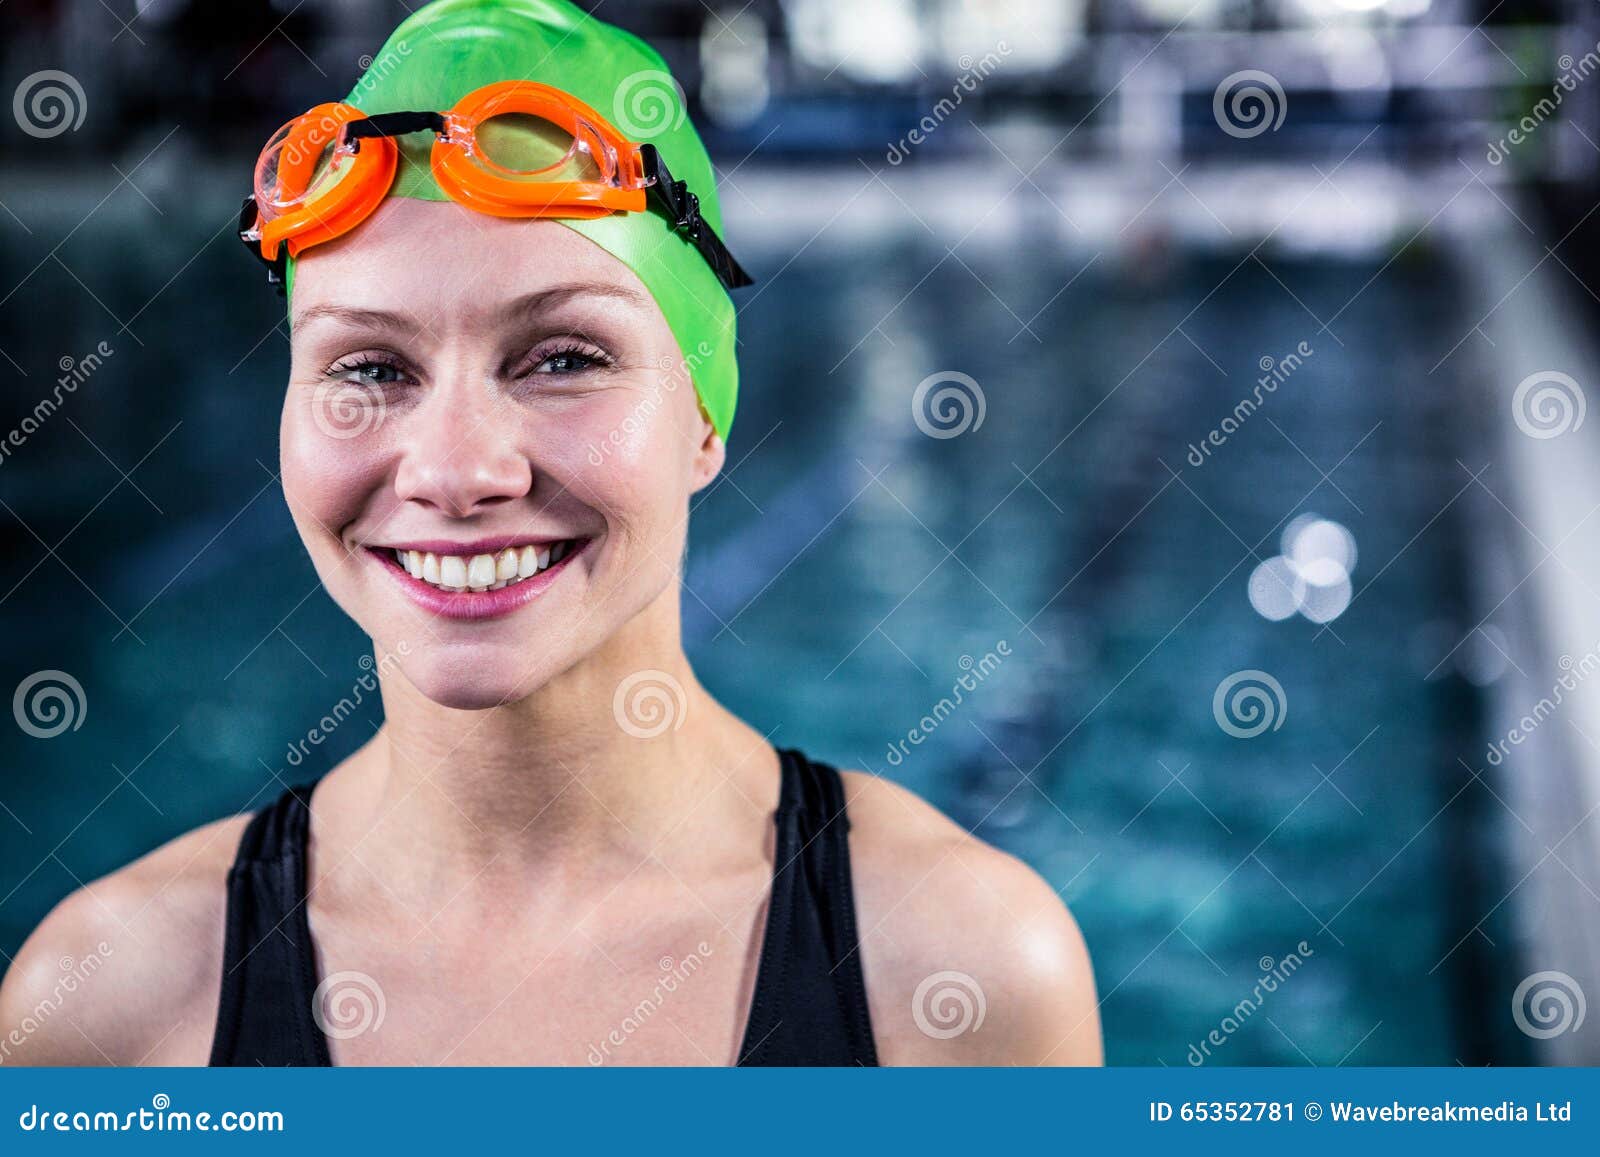 Portrait Of A Woman Swimmer Looking The Camera Stock Image Image Of Female Beautiful 65352781